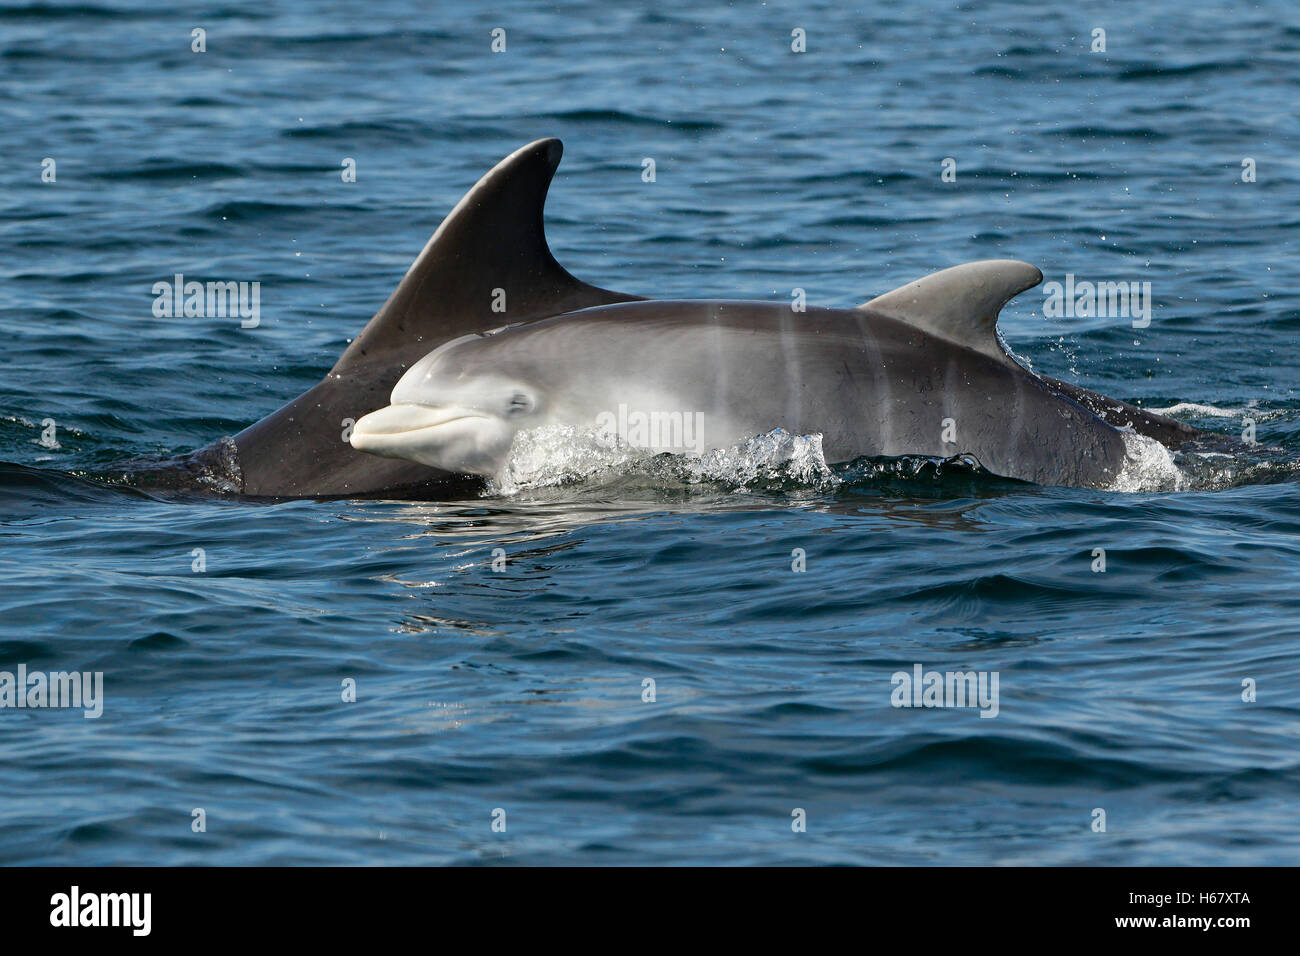 A Bottlenose dolphin baby surfaces to breathe next to its Mother, Moray Firth, Scotland. The young dolphin has vertical foetal fold stripes on body. Stock Photo